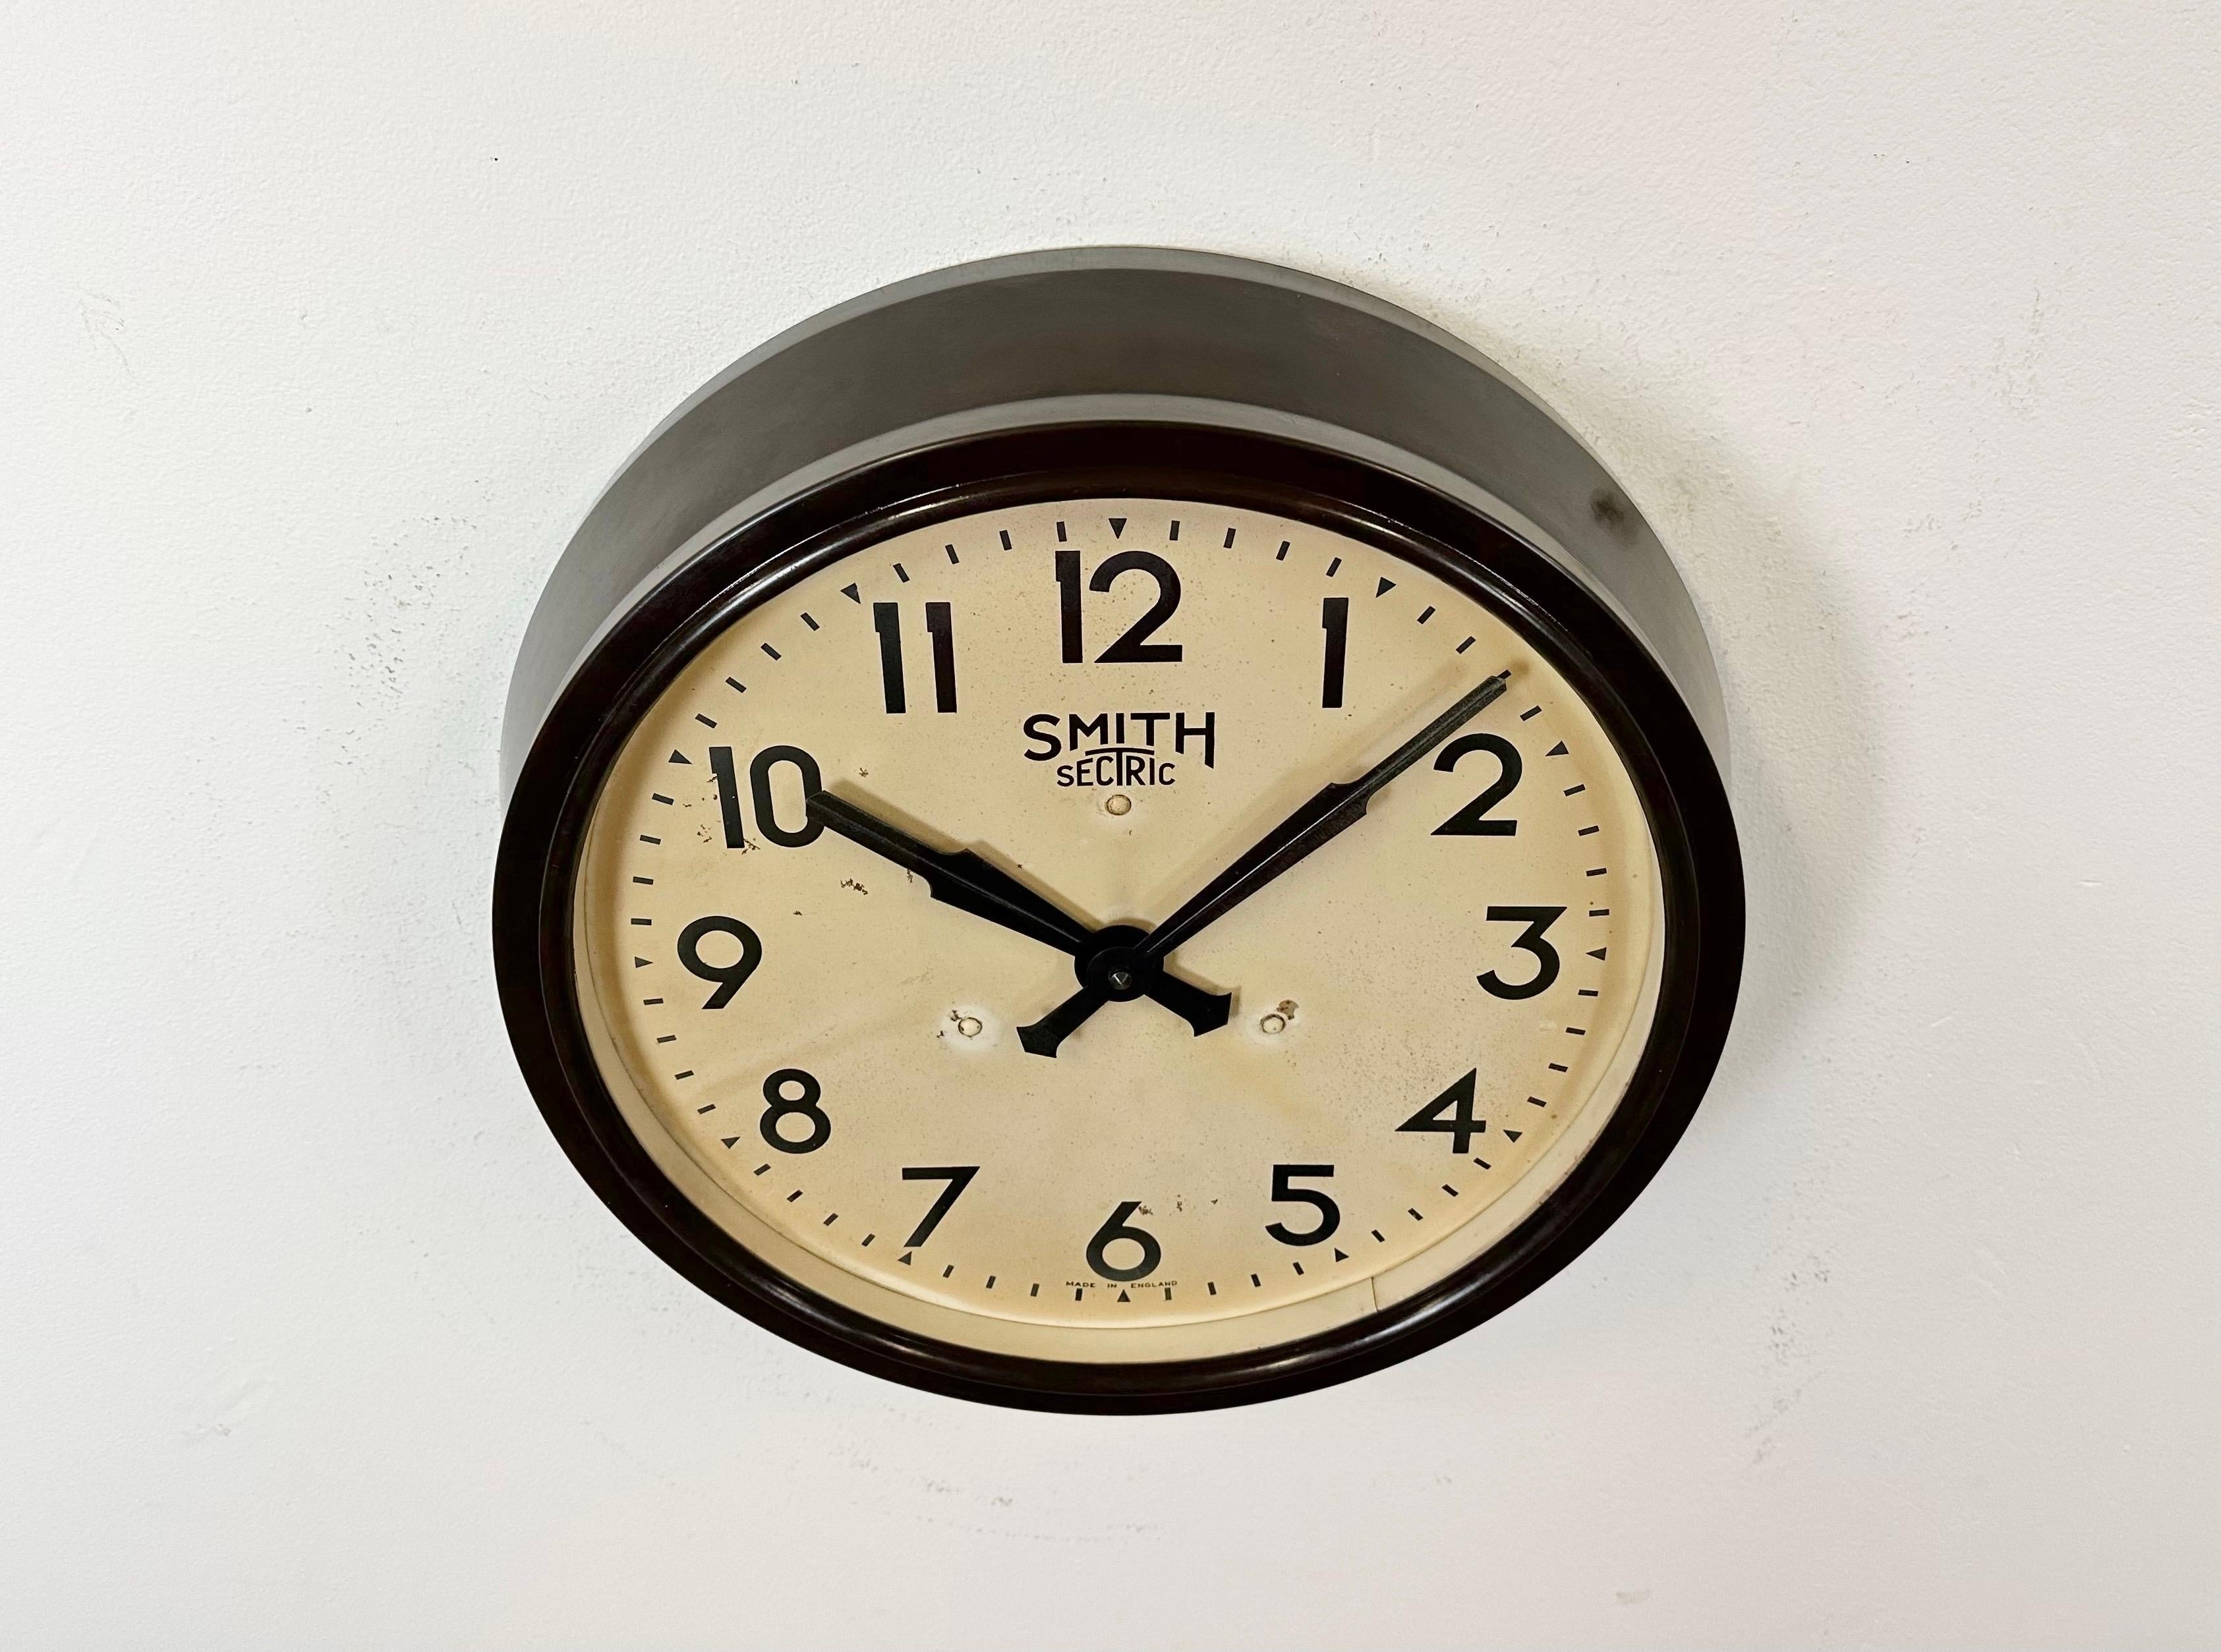 Czech Brown Industrial Bakelite Wall Clock from Smith Sectric, 1950s